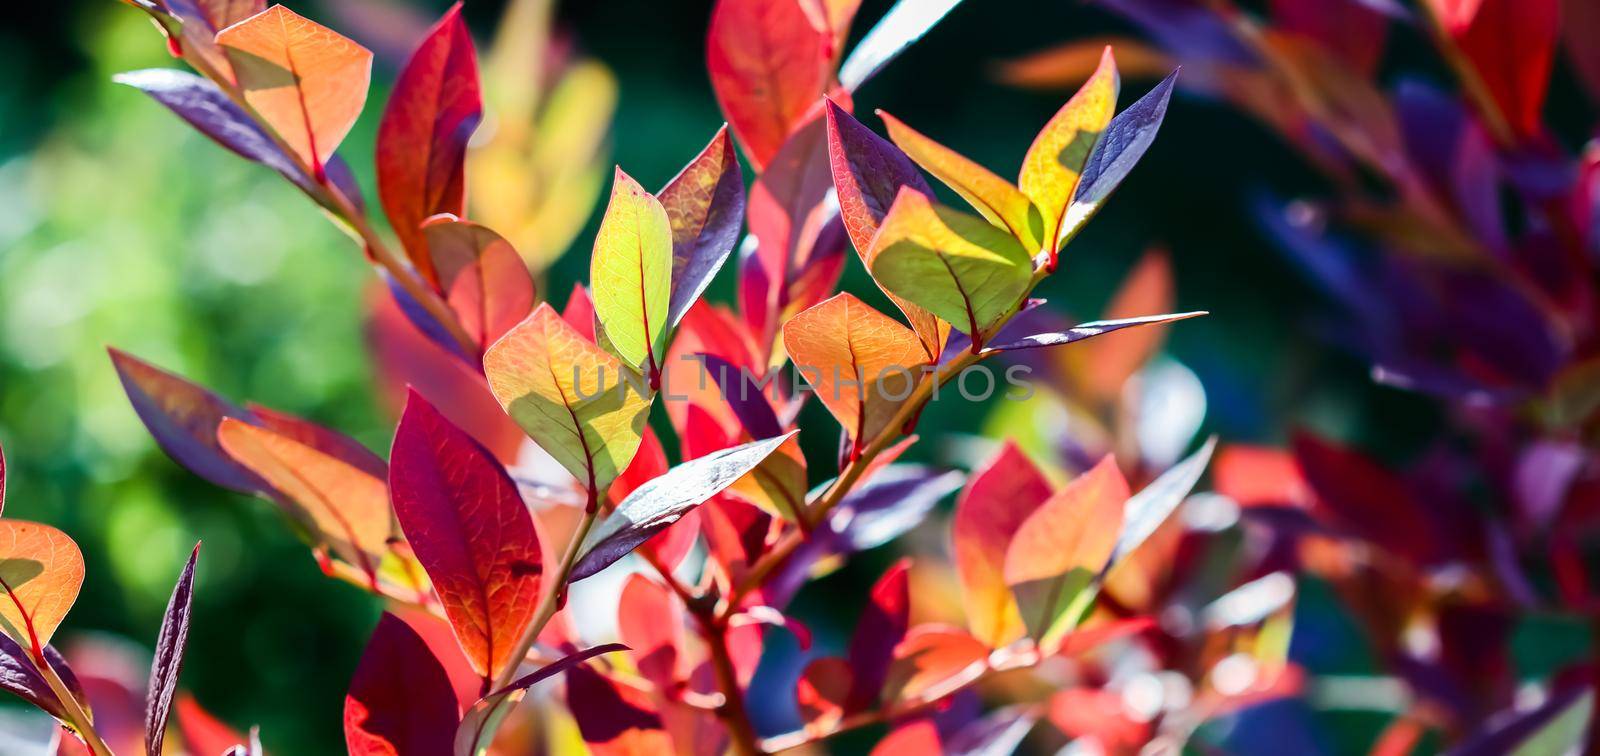 Red leaves on a branch of a blueberry bush in the garden. Blurred autumn background